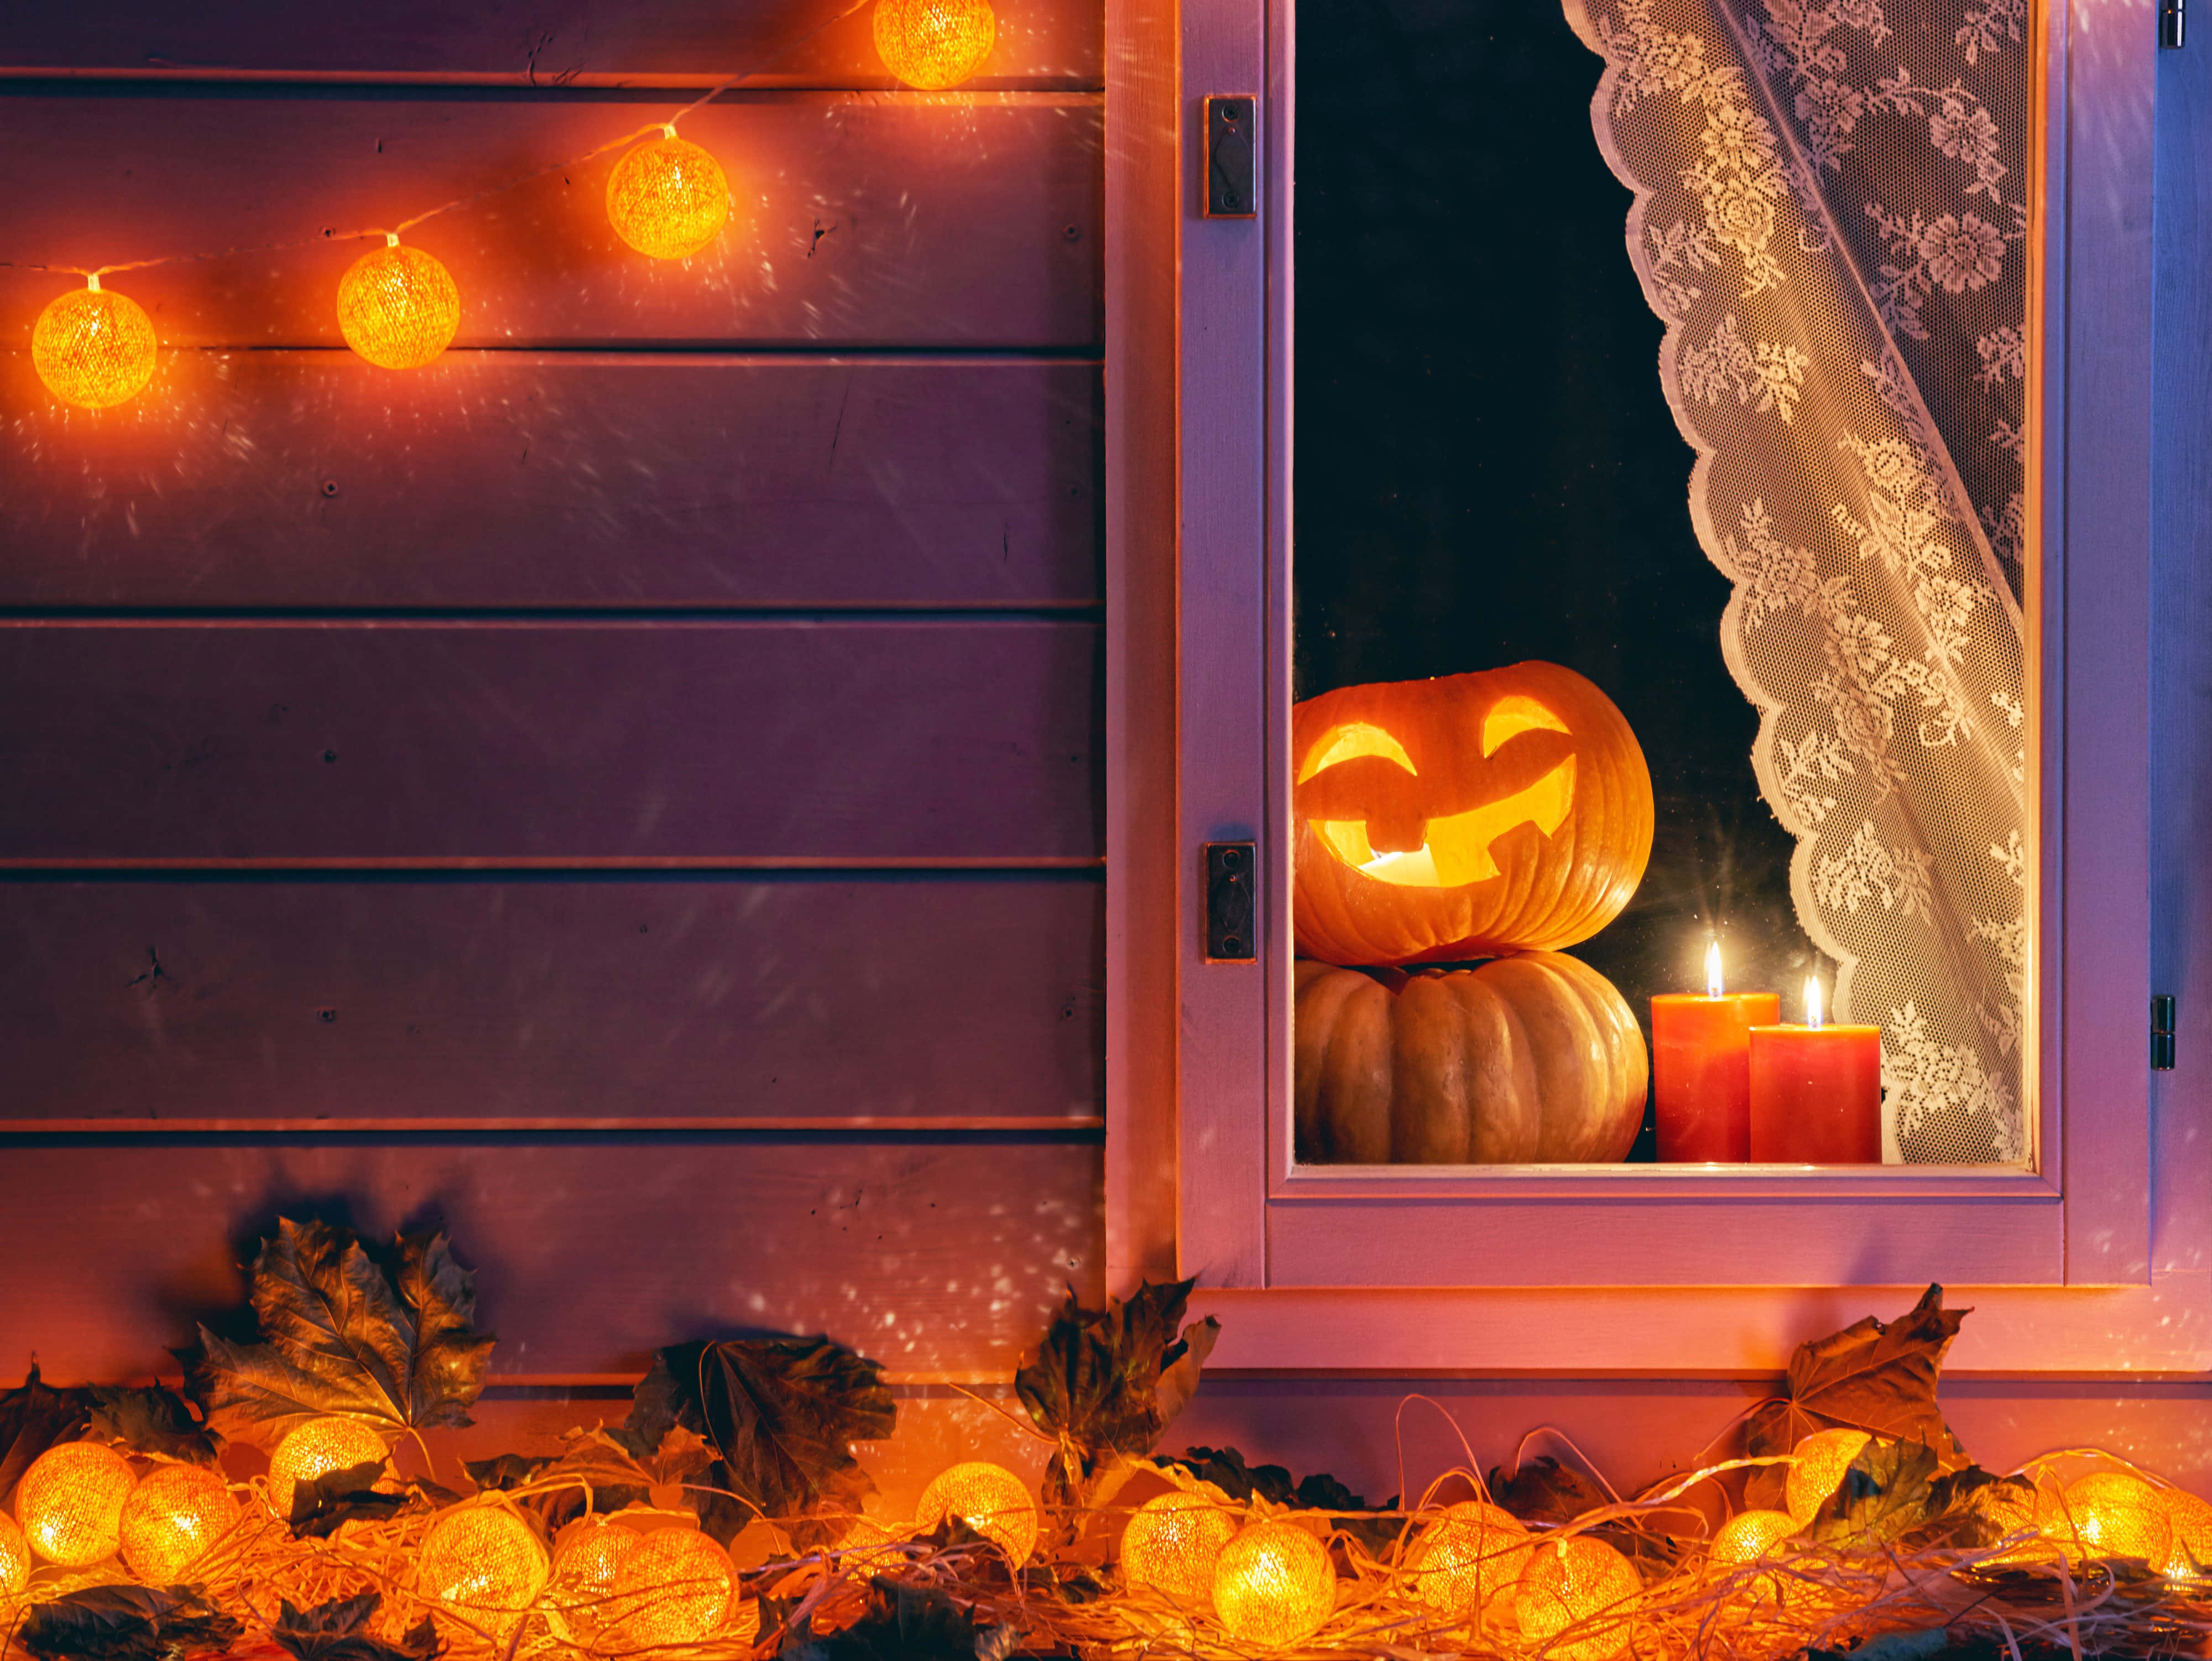 Light up your Halloween celebration with festive candles! Wallpaper